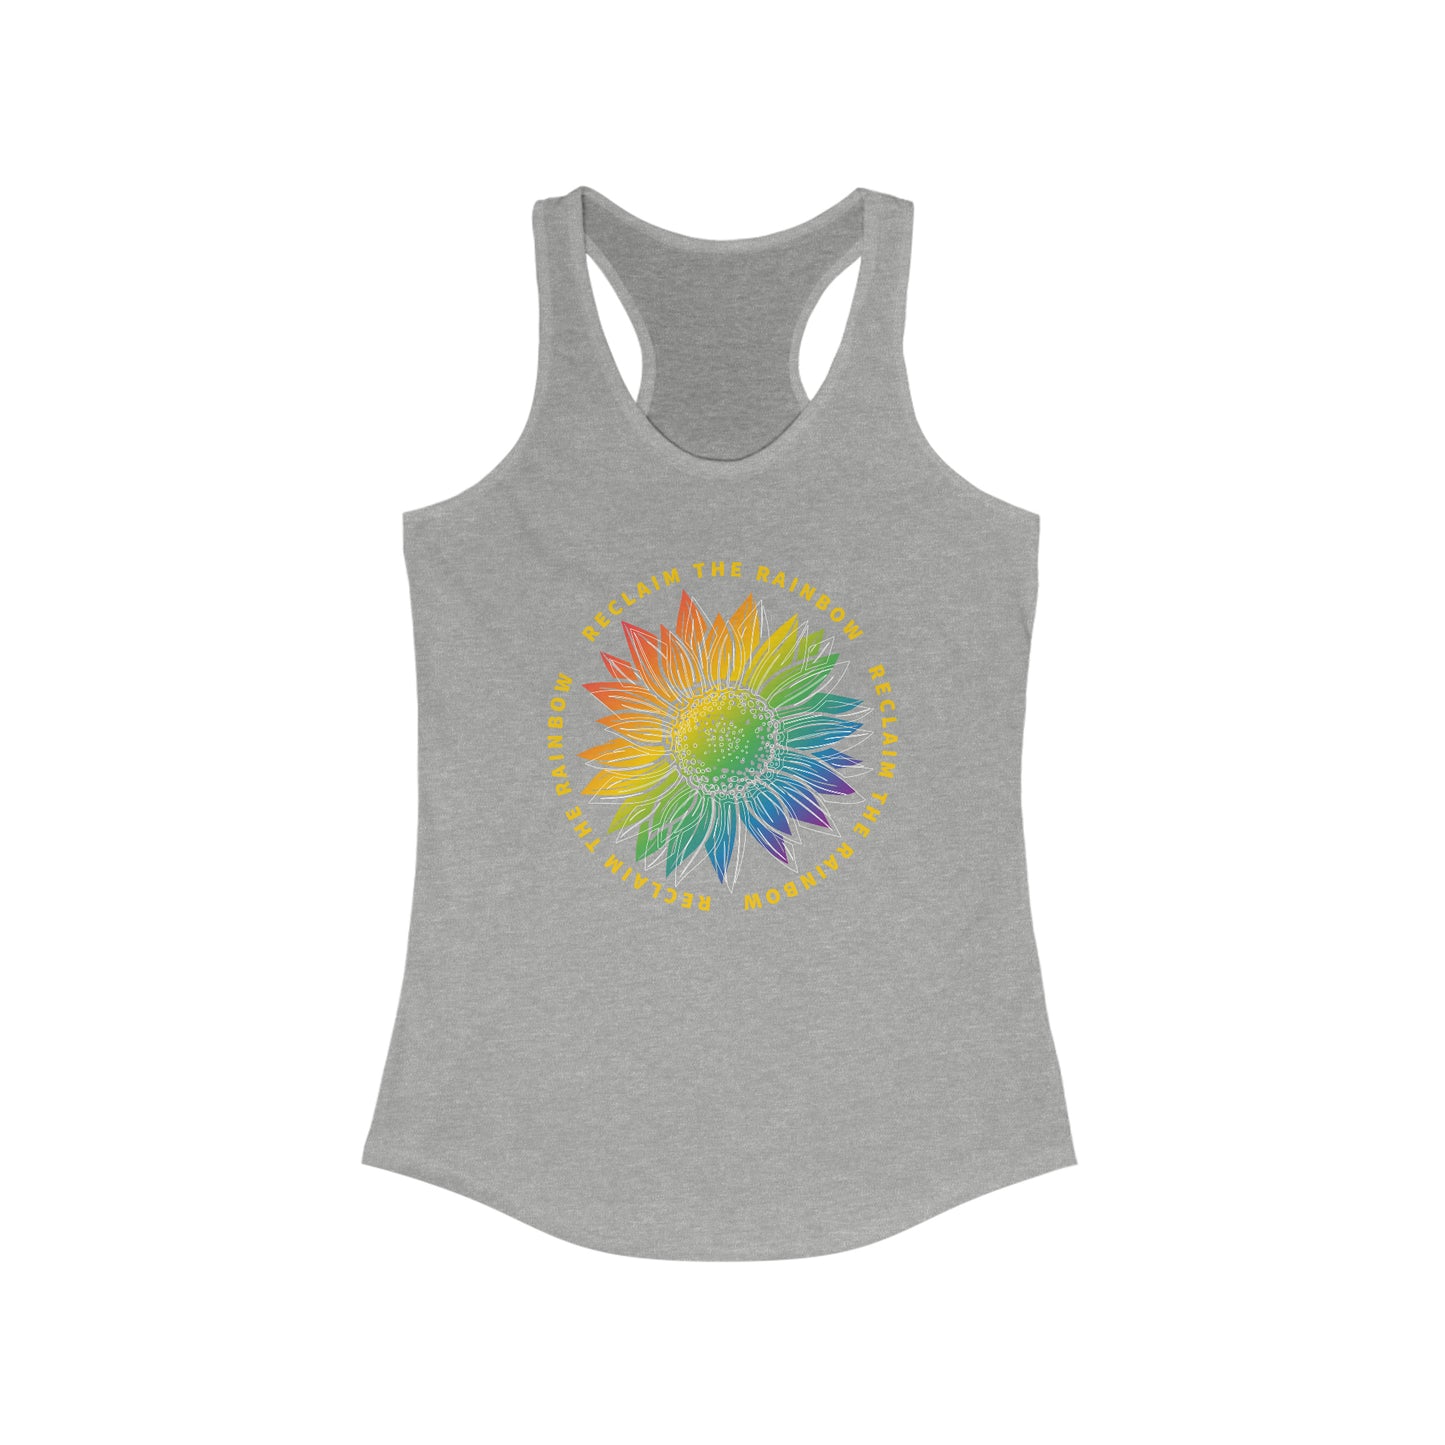 Sunflower Tank Top For Reclaim The Rainbow Tank Top For Take Back The Rainbow Shirt For Spiritual Tank For Genesis 9:17 Tank Top For Christian Shirts